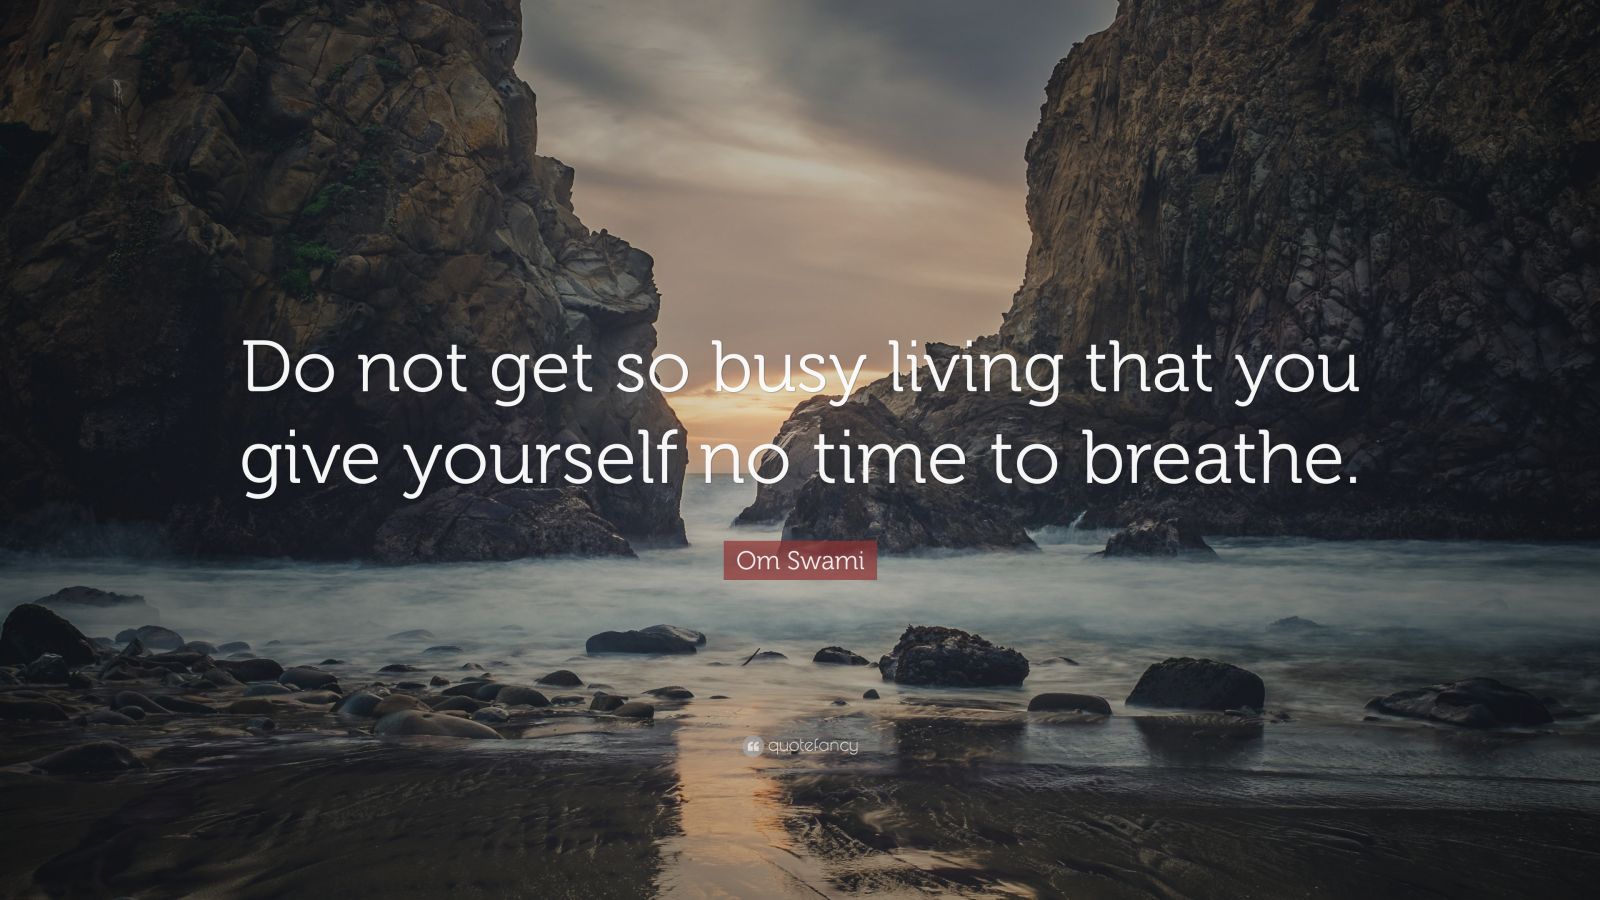 Om Swami Quote: “Do not get so busy living that you give yourself no ...